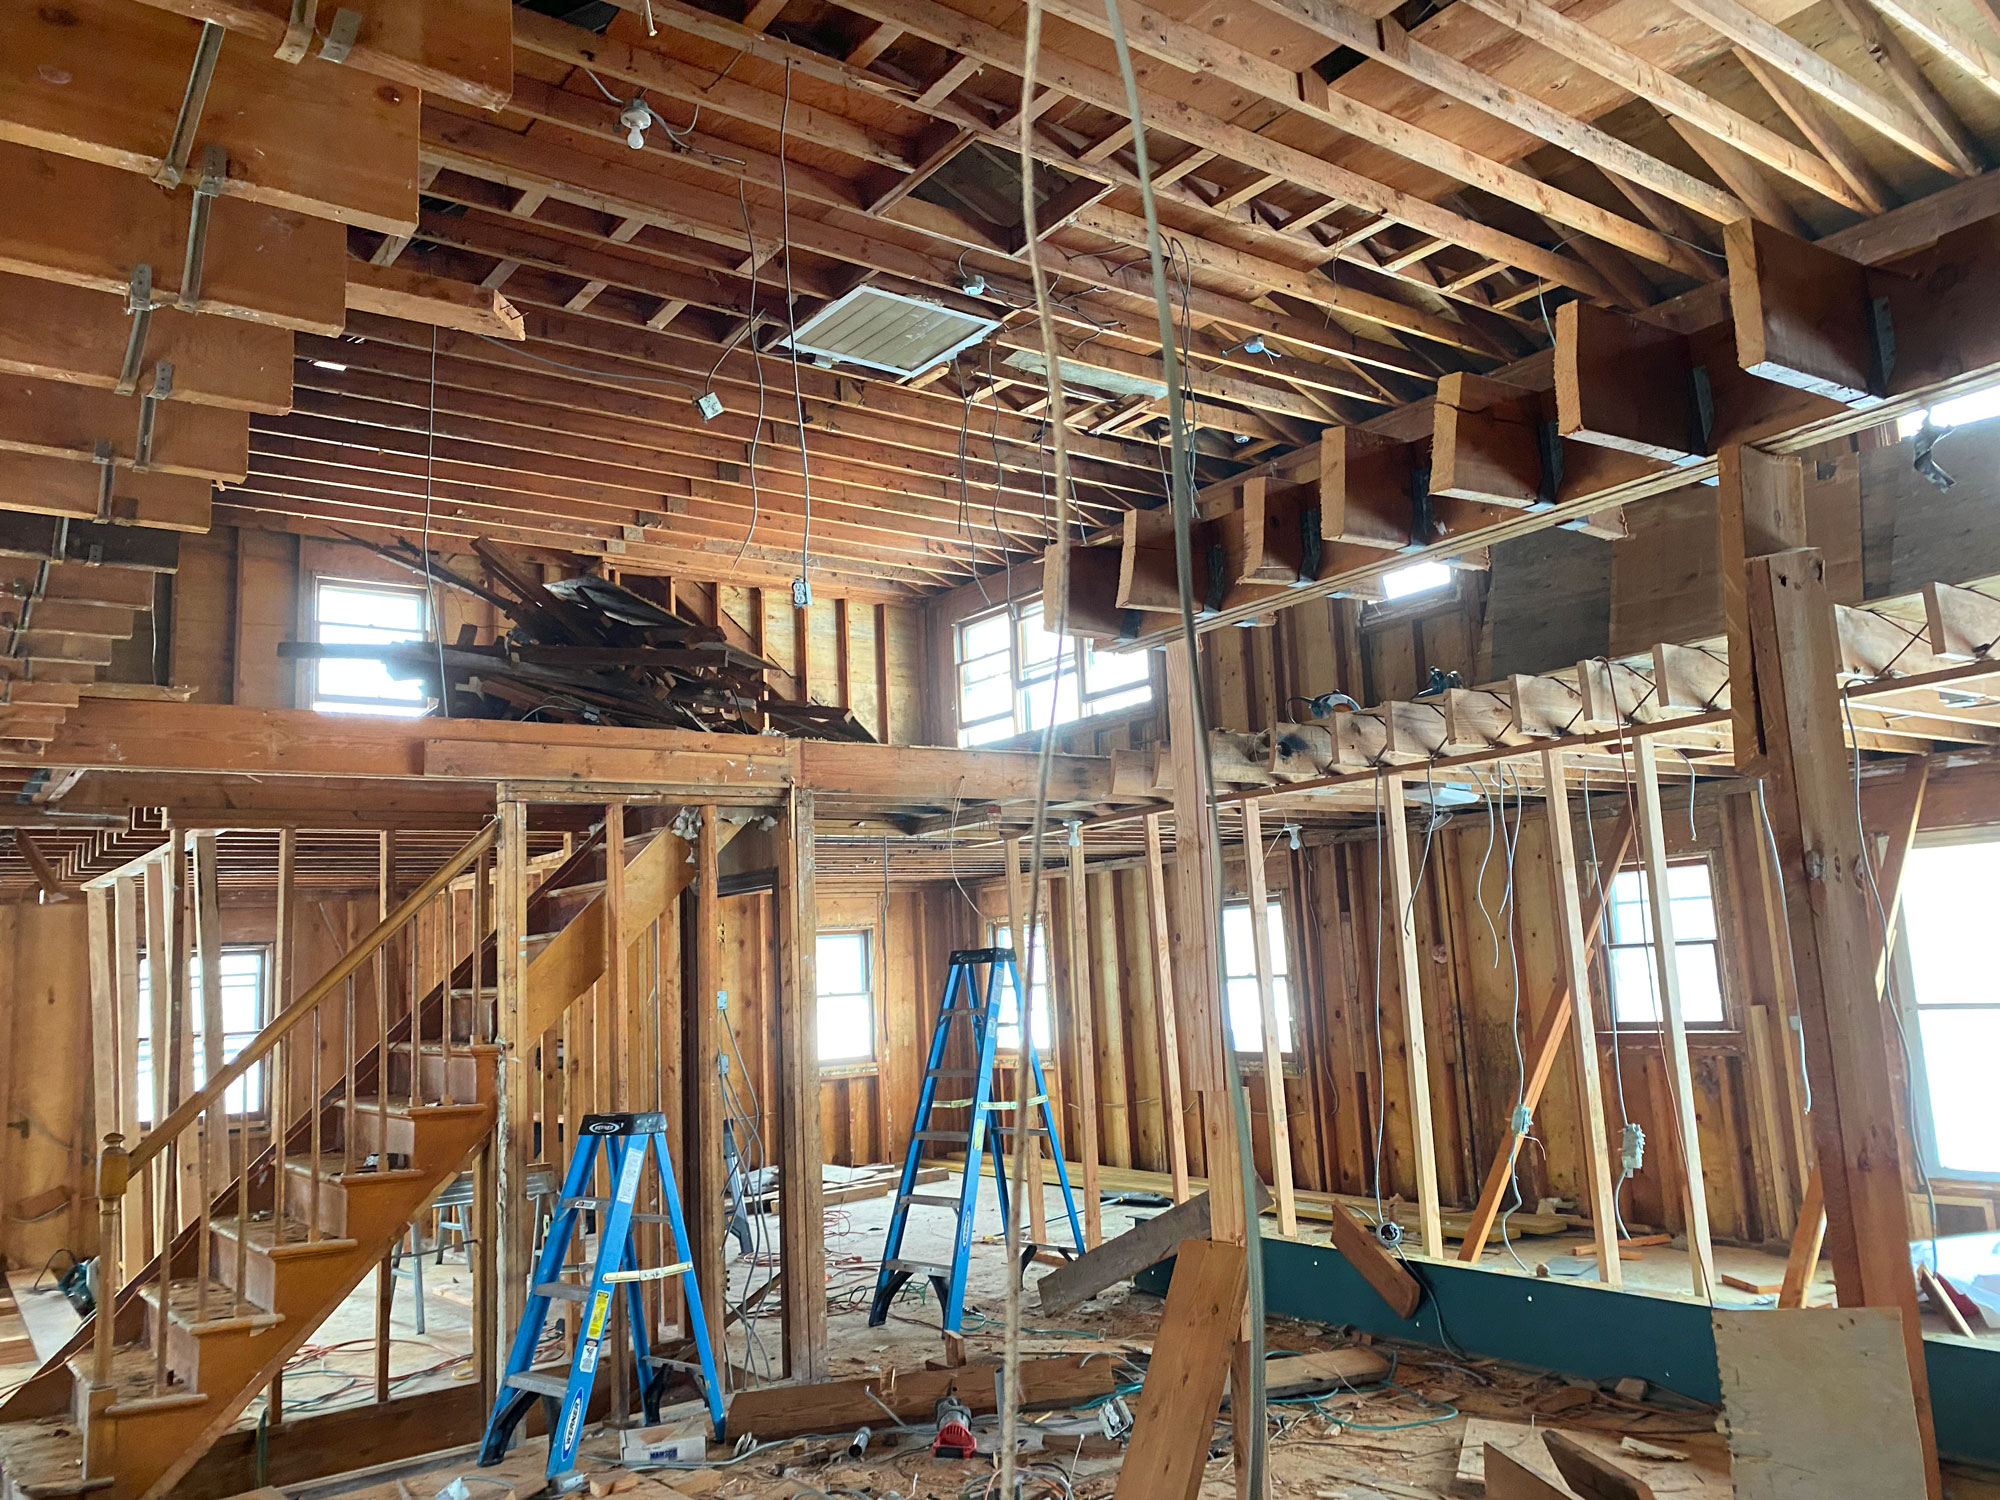 Case Study of a Remodeling Project in Milford CT